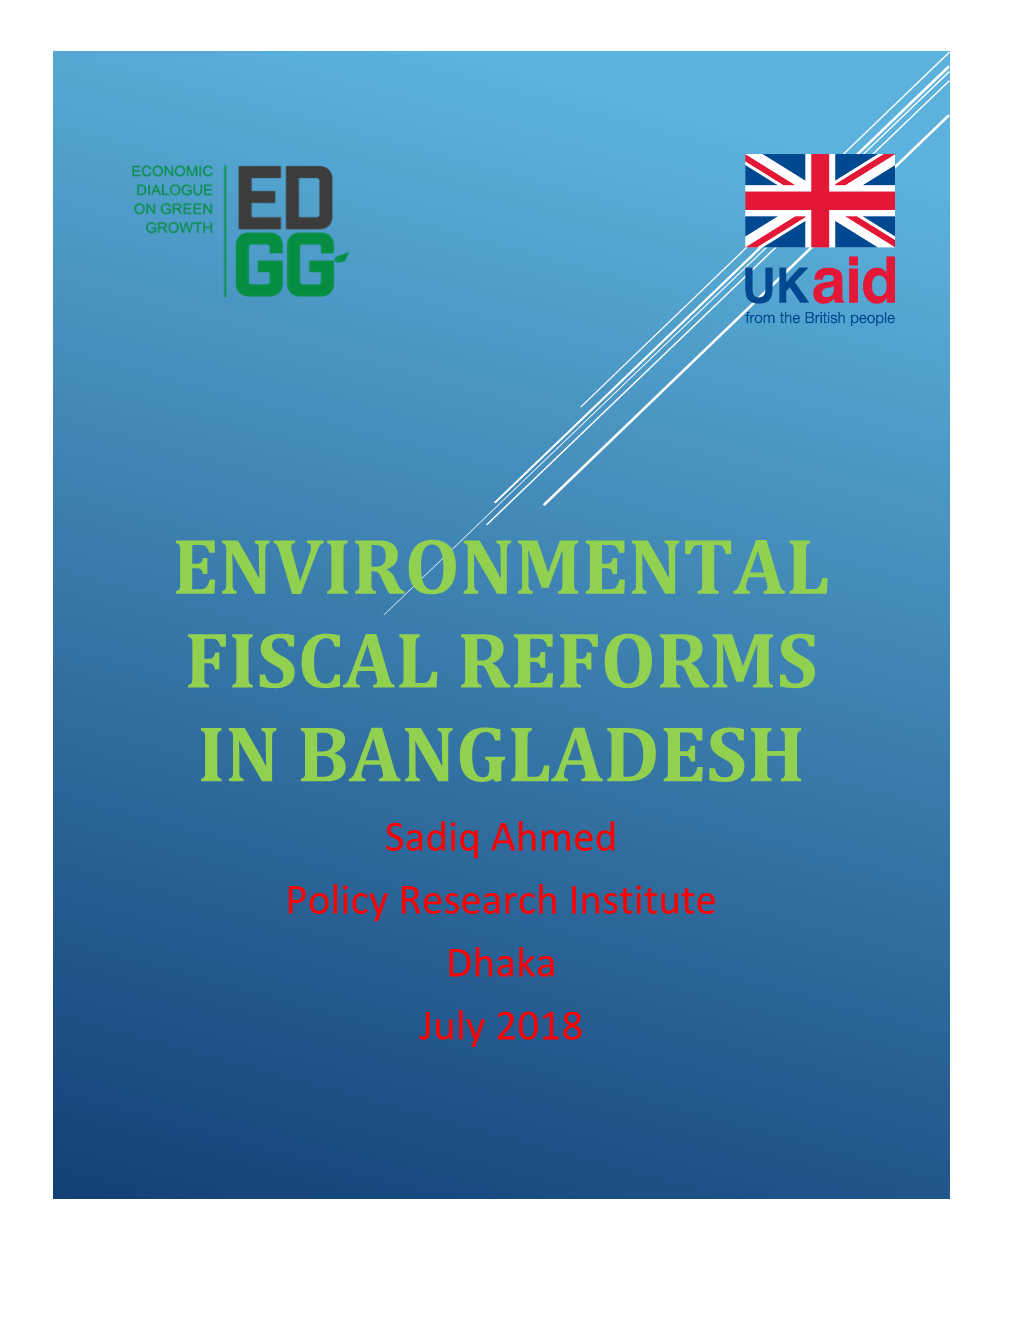 ENVIRONMENTAL FISCAL REFORMS in BANGLADESH Sadiq Ahmed Policy Research Institute Dhaka July 2018 Table of Contents